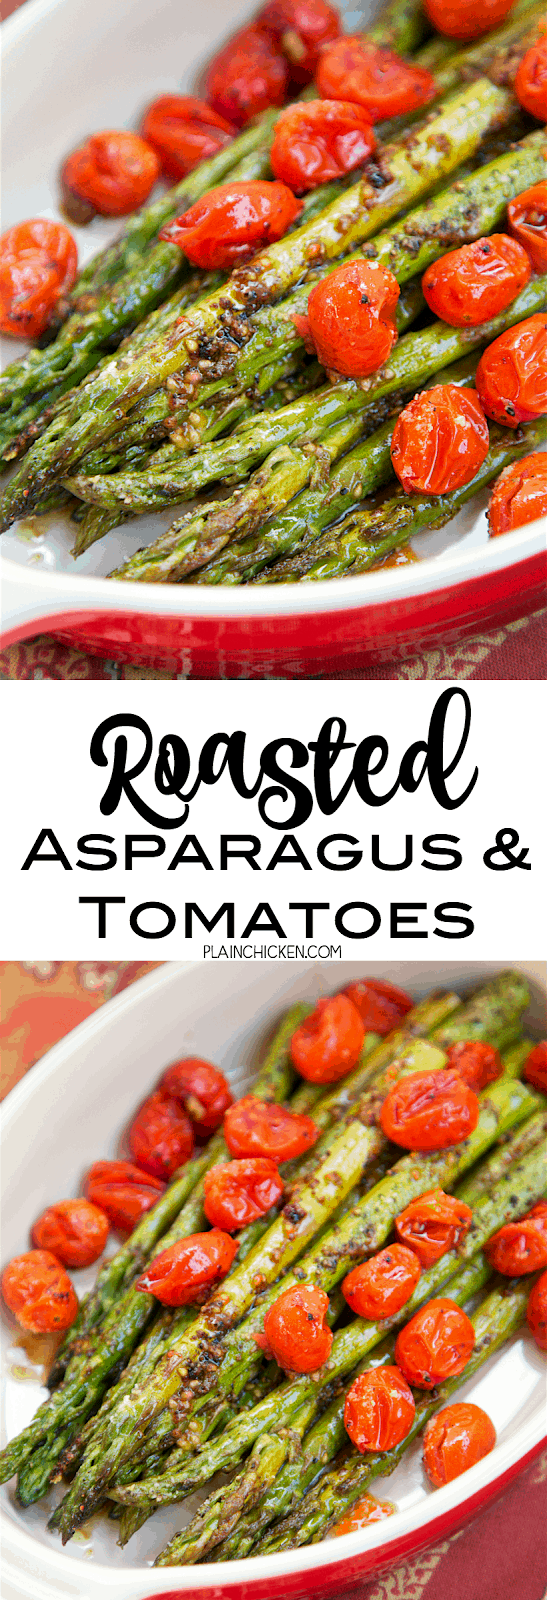 Roasted Asparagus and Tomatoes - takes one minute to toss together and is ready to eat in 15 minutes! SO quick and easy!! Asparagus,grape tomatoes, olive oil, balsamic, parmesan. Great weeknight side dish. Goes with everything! YUM!